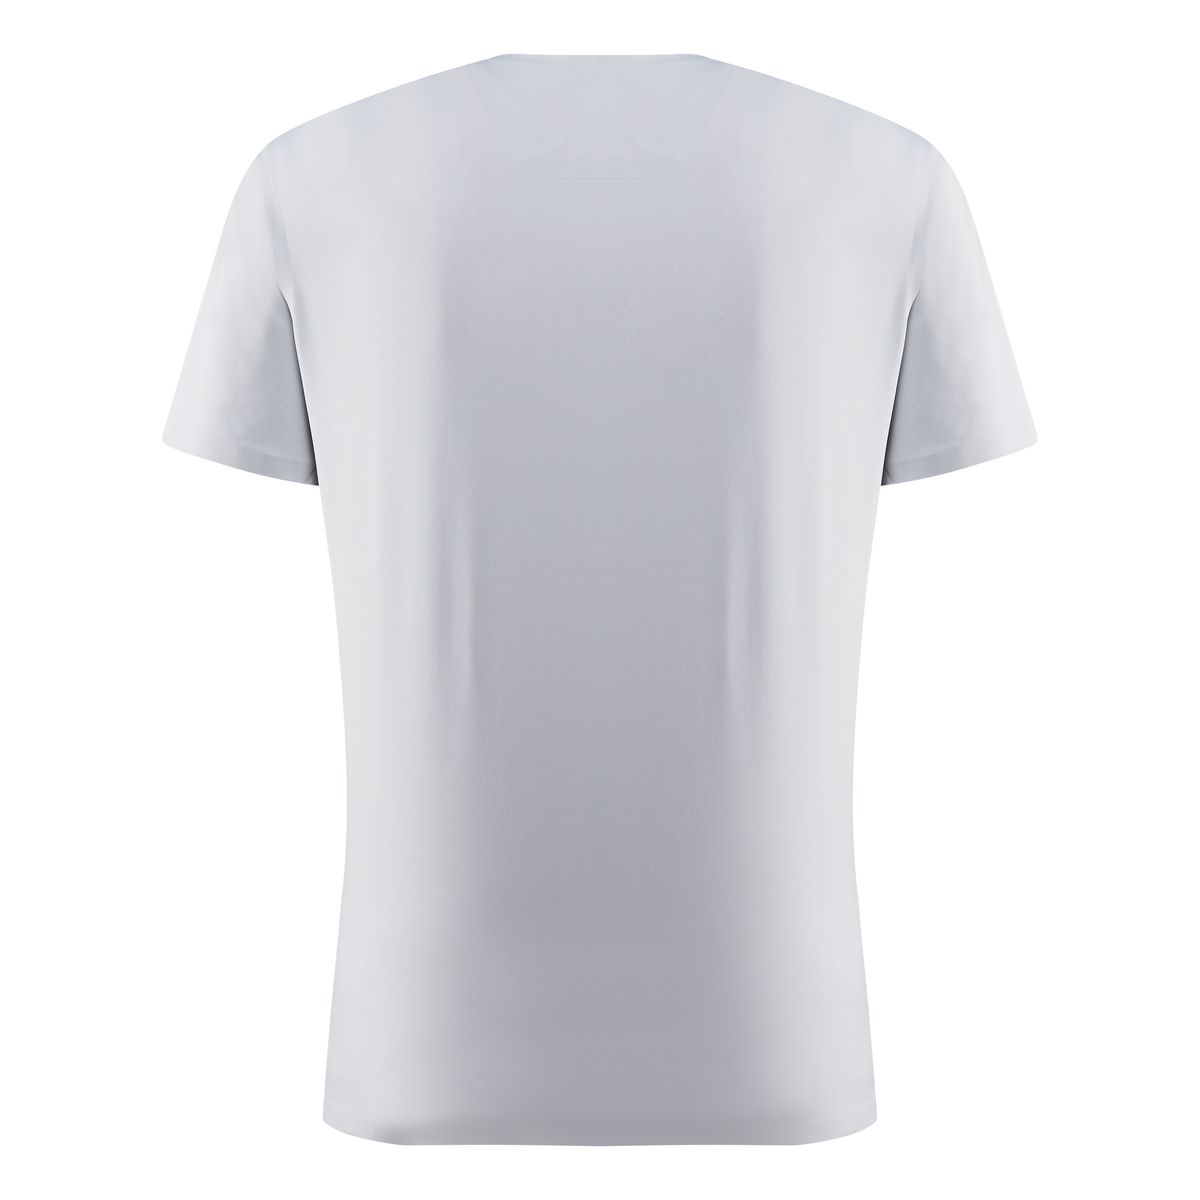 Layer-X Short Sleeve t-shirt / Activewear Series by Graphene-X